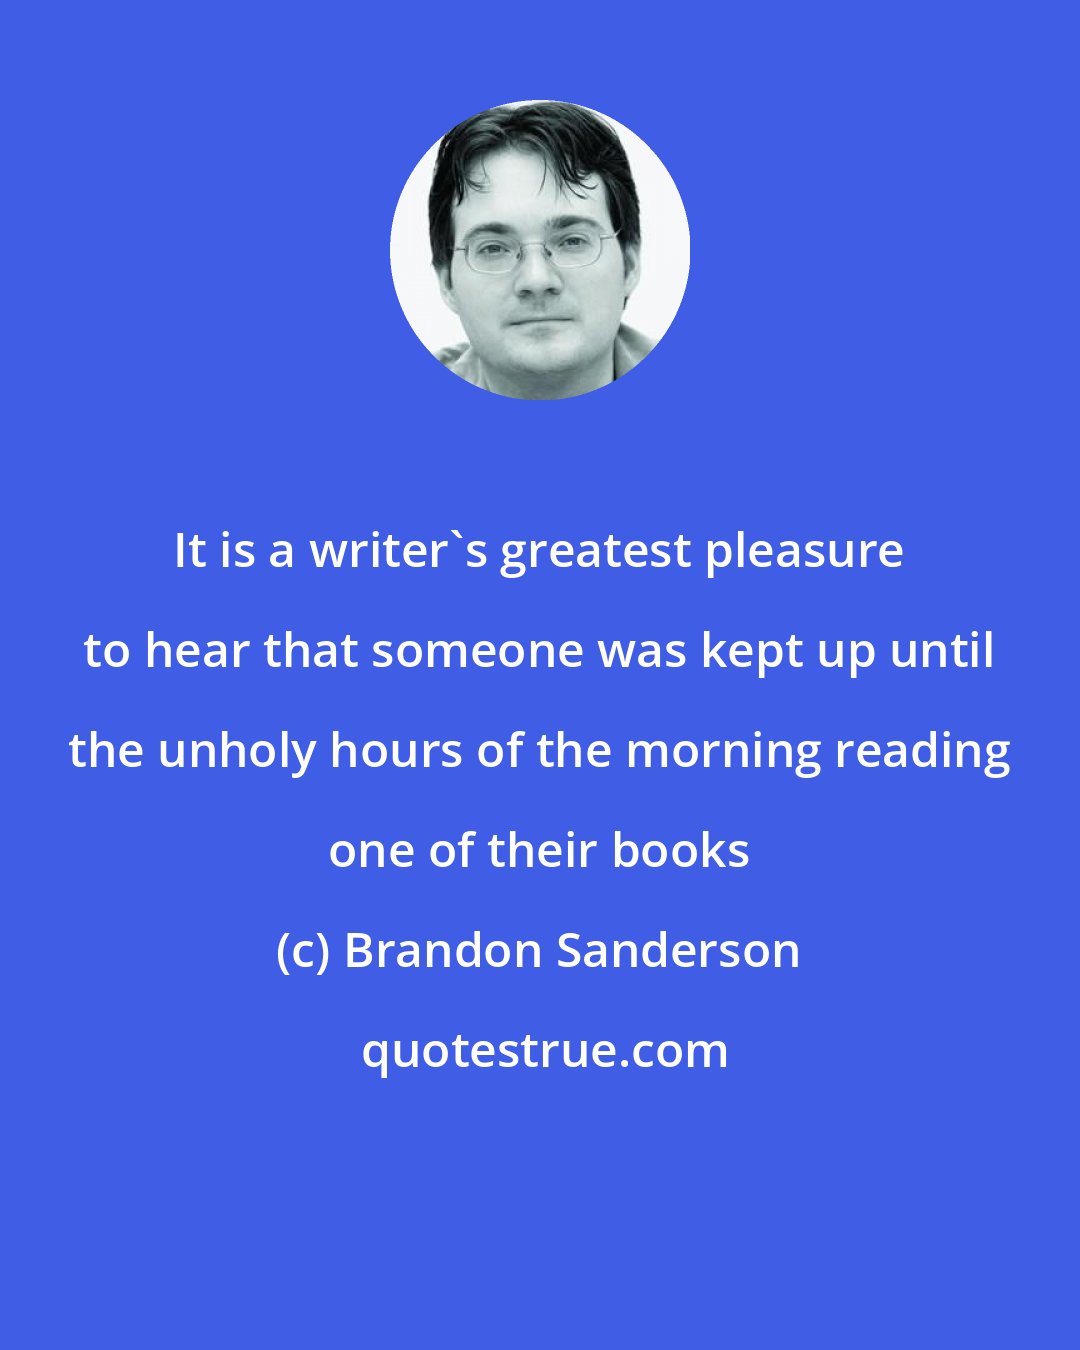 Brandon Sanderson: It is a writer's greatest pleasure to hear that someone was kept up until the unholy hours of the morning reading one of their books